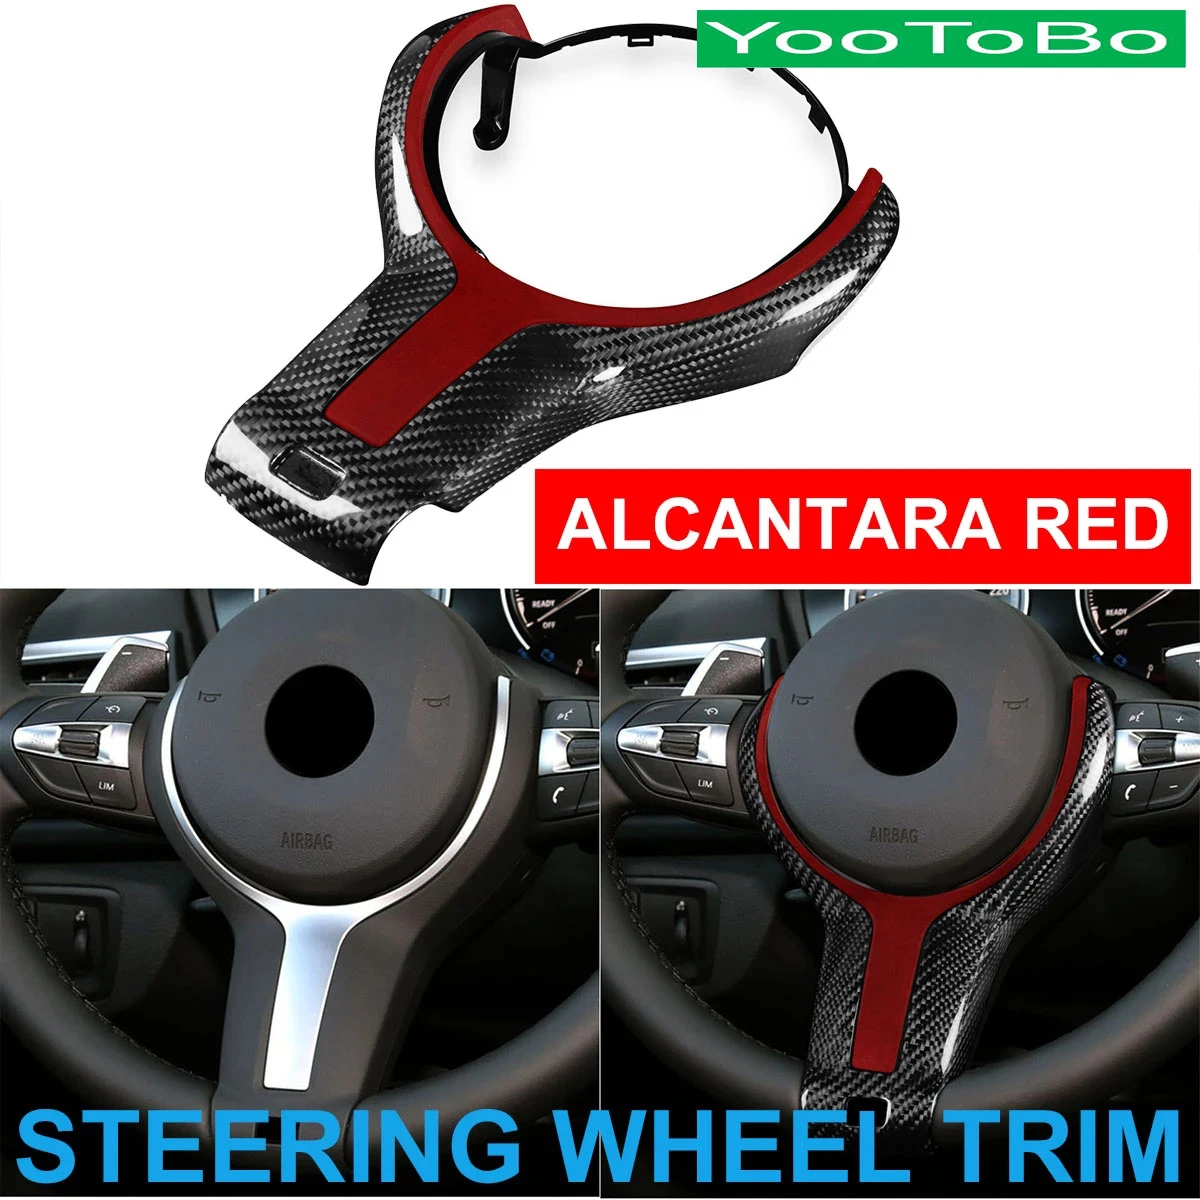 

Carbon Car Steering Wheel Trim Cover Replace Alcantara RED For BMW M Sport F20 F22 F30 F31 F32 F36 F10M F06 F12 X5 F15 X6 F16